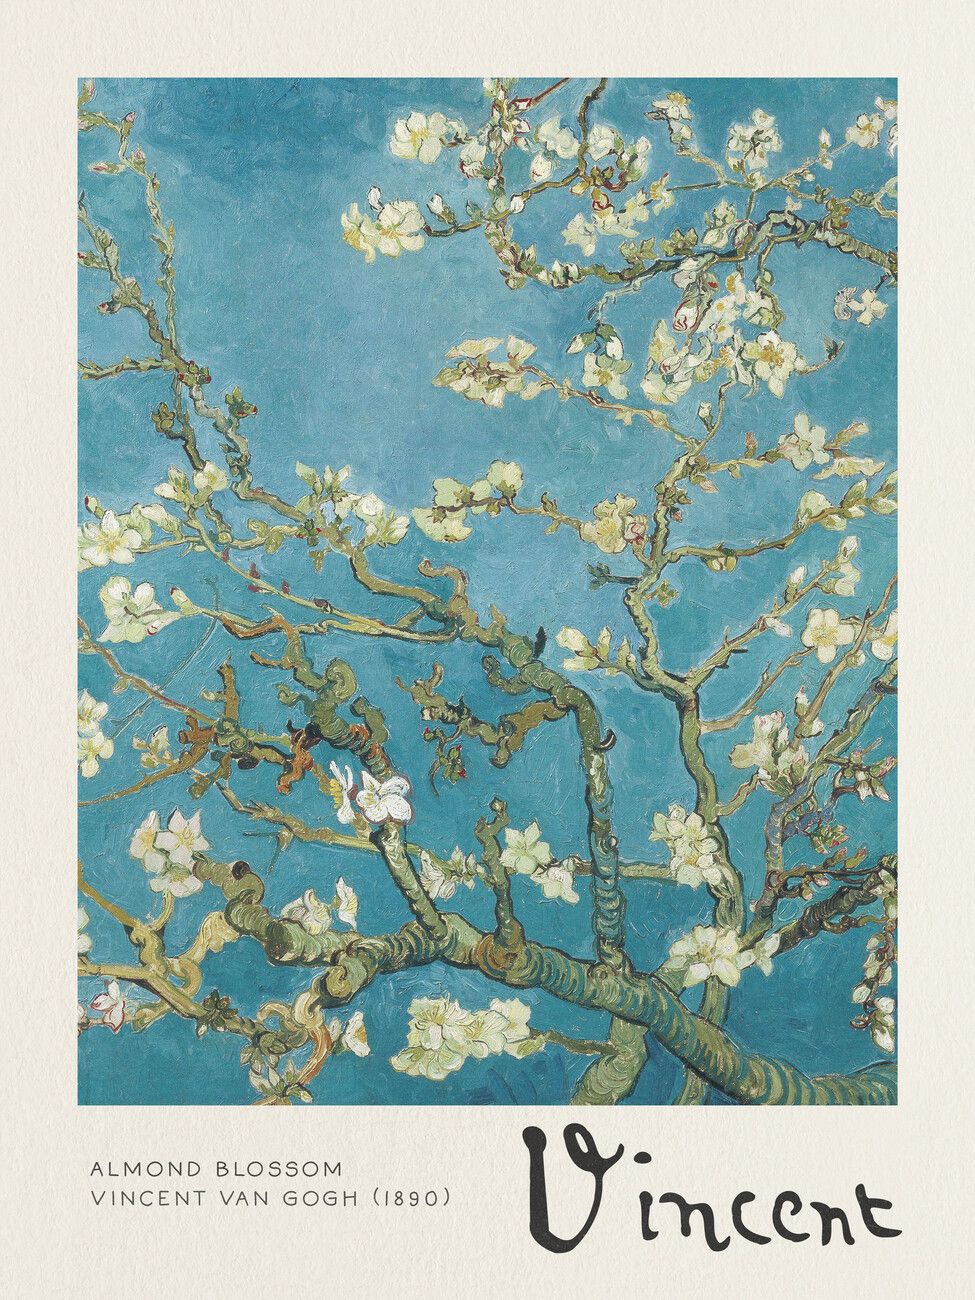 Wall Art Print | Almond Blossom – Vincent Van Gogh | Europosters For Most Up To Date Almond Blossoms Wall Art (View 10 of 20)